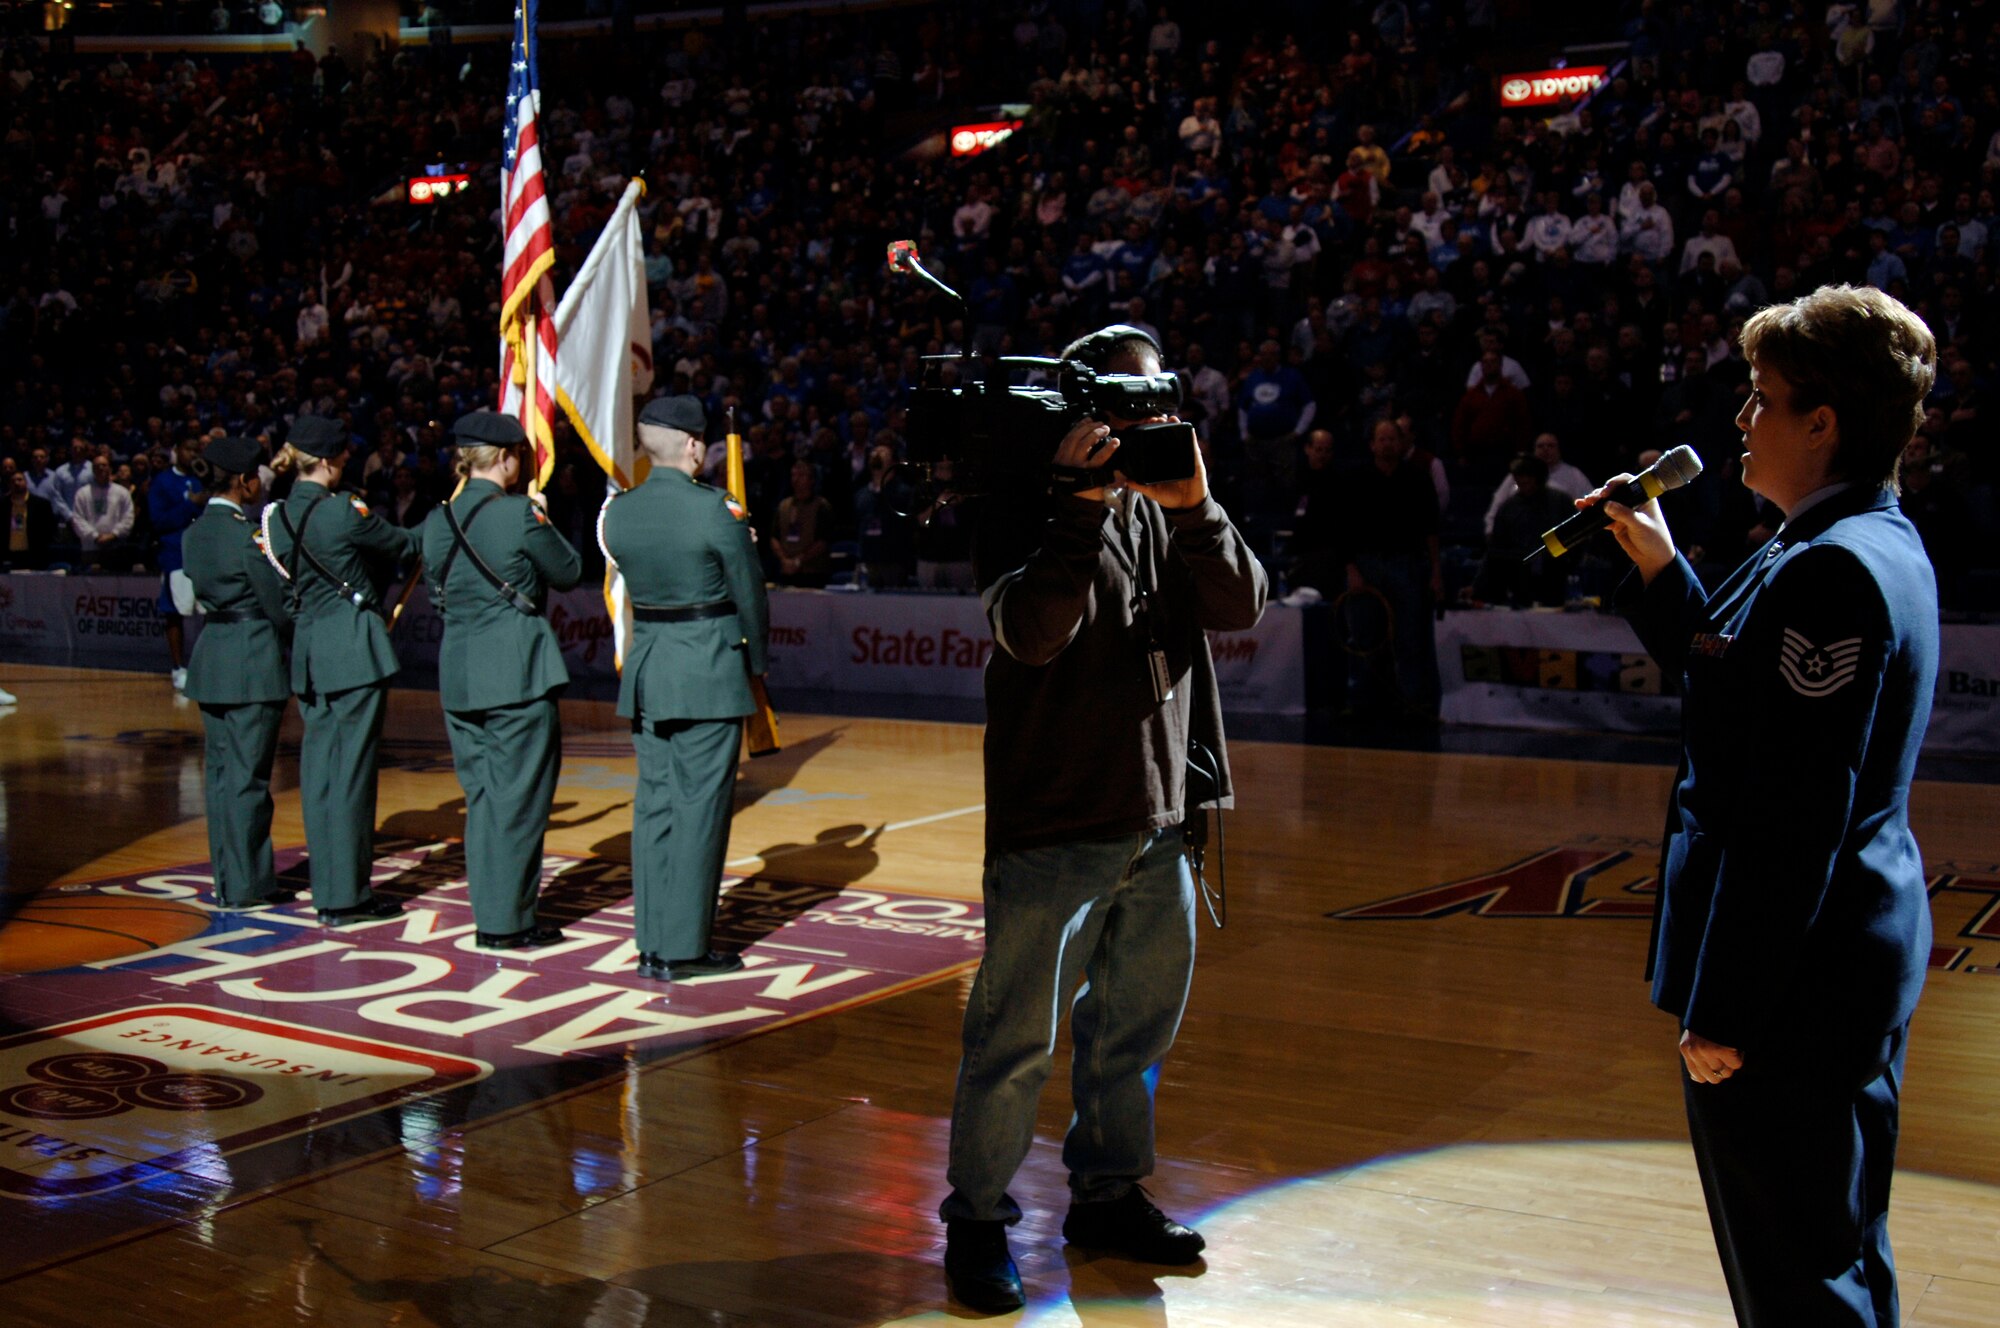 Tech. Sgt. Kristine Keyser, a readiness NCO from the 375th Mission Support Squadron’s Airman and Family Readiness Center, sings the national anthem as the Illinois State University ROTC Honor Guard post the colors prior to the college basketball semifinals of the Missouri Valley Tournament between the Drake Bulldogs and the Creighton Bluejays held at Scottrade Center, in St. Louis.  

U.S. Air Force photo by Tech Sgt. Tony R. Tolley 

